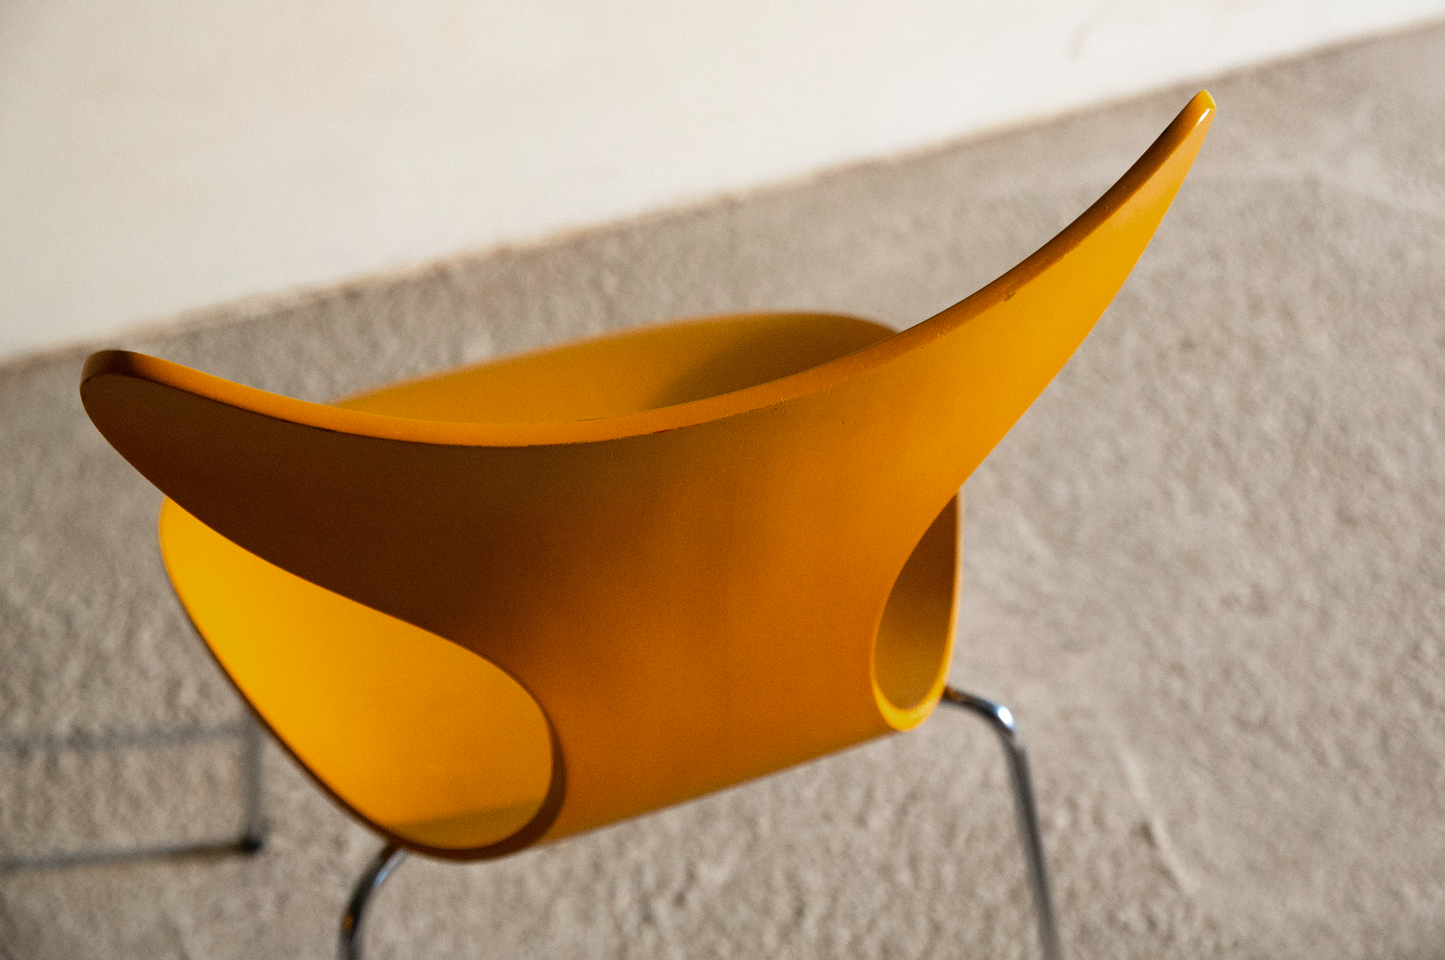 Arne Jacobsen｜The Lily Chair